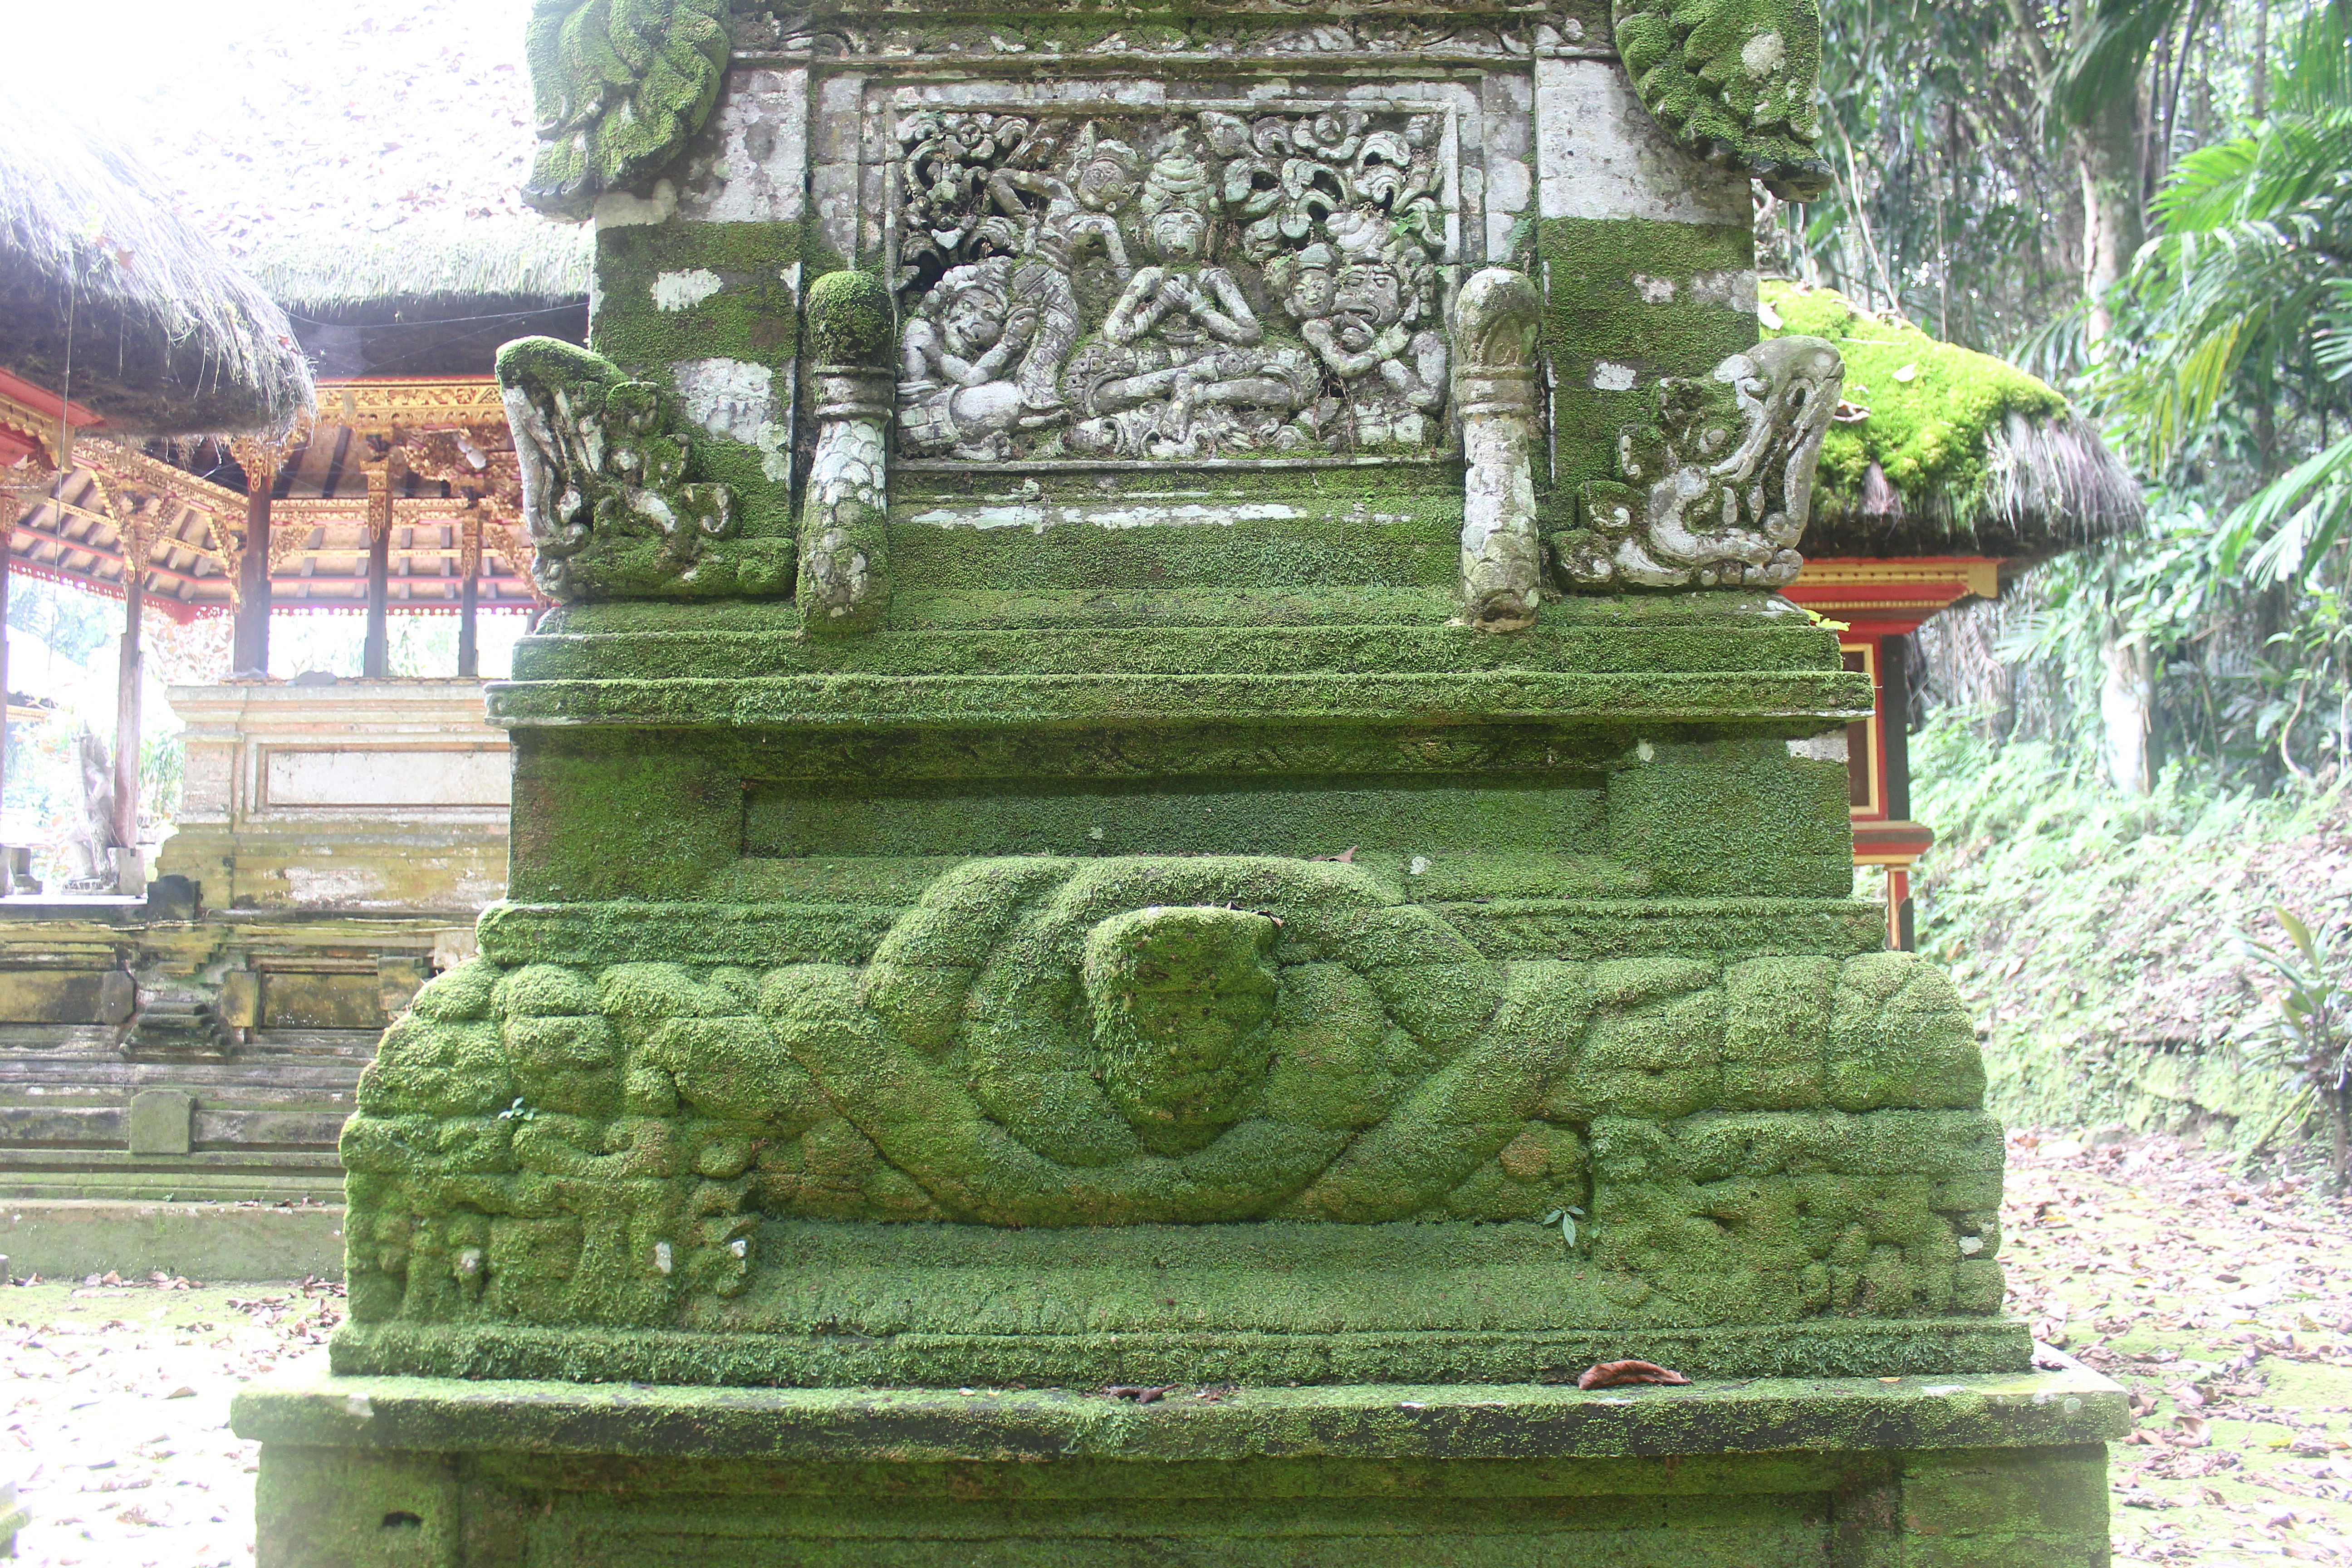 Overgrown shrine with serpent carvings